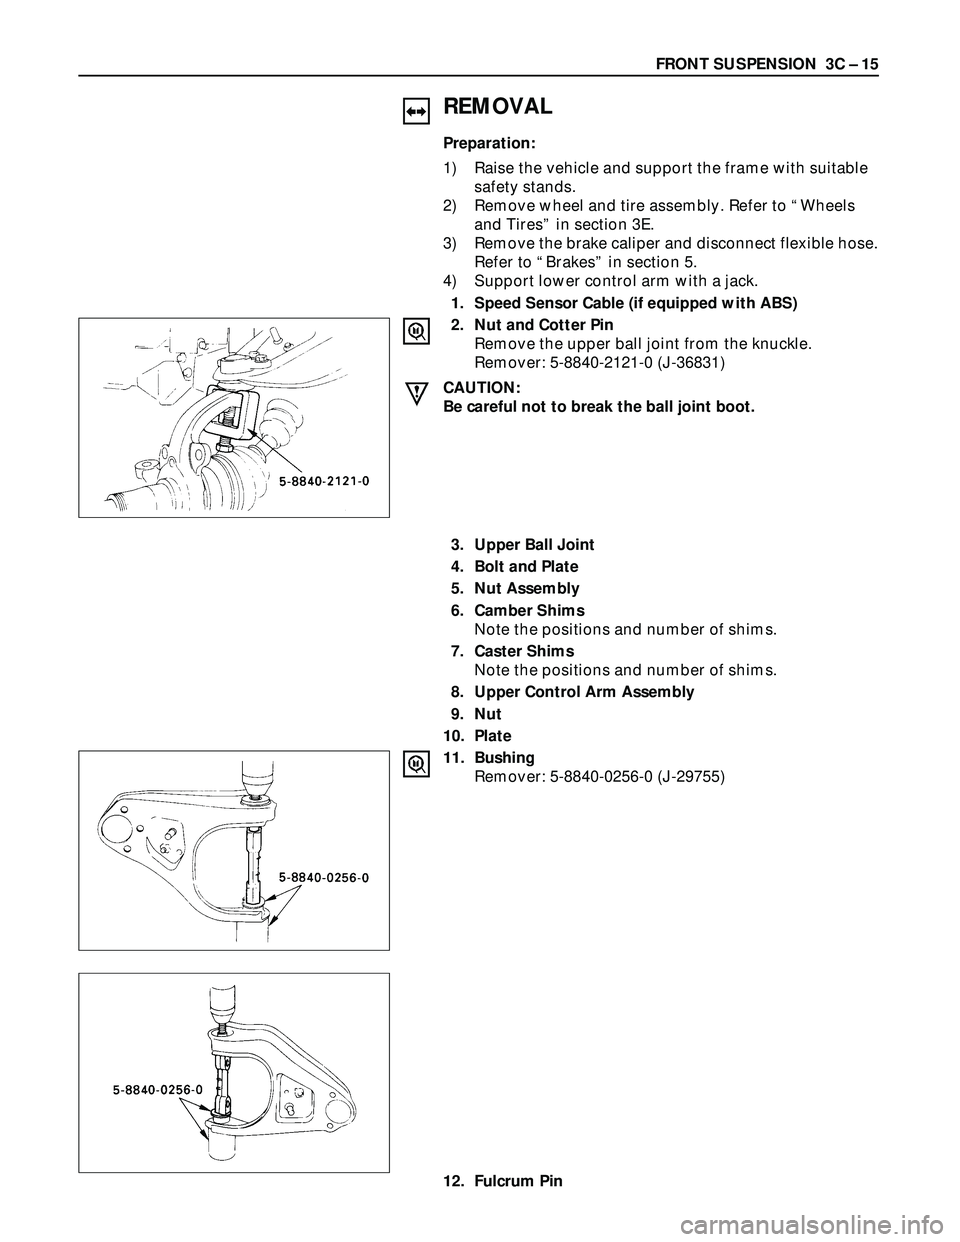 ISUZU TROOPER 1998  Service Repair Manual FRONT SUSPENSION  3C – 15
REMOVAL
Preparation:
1) Raise the vehicle and support the frame with suitable
safety stands.
2) Remove wheel and tire assembly. Refer to “Wheels
and Tires” in section 3